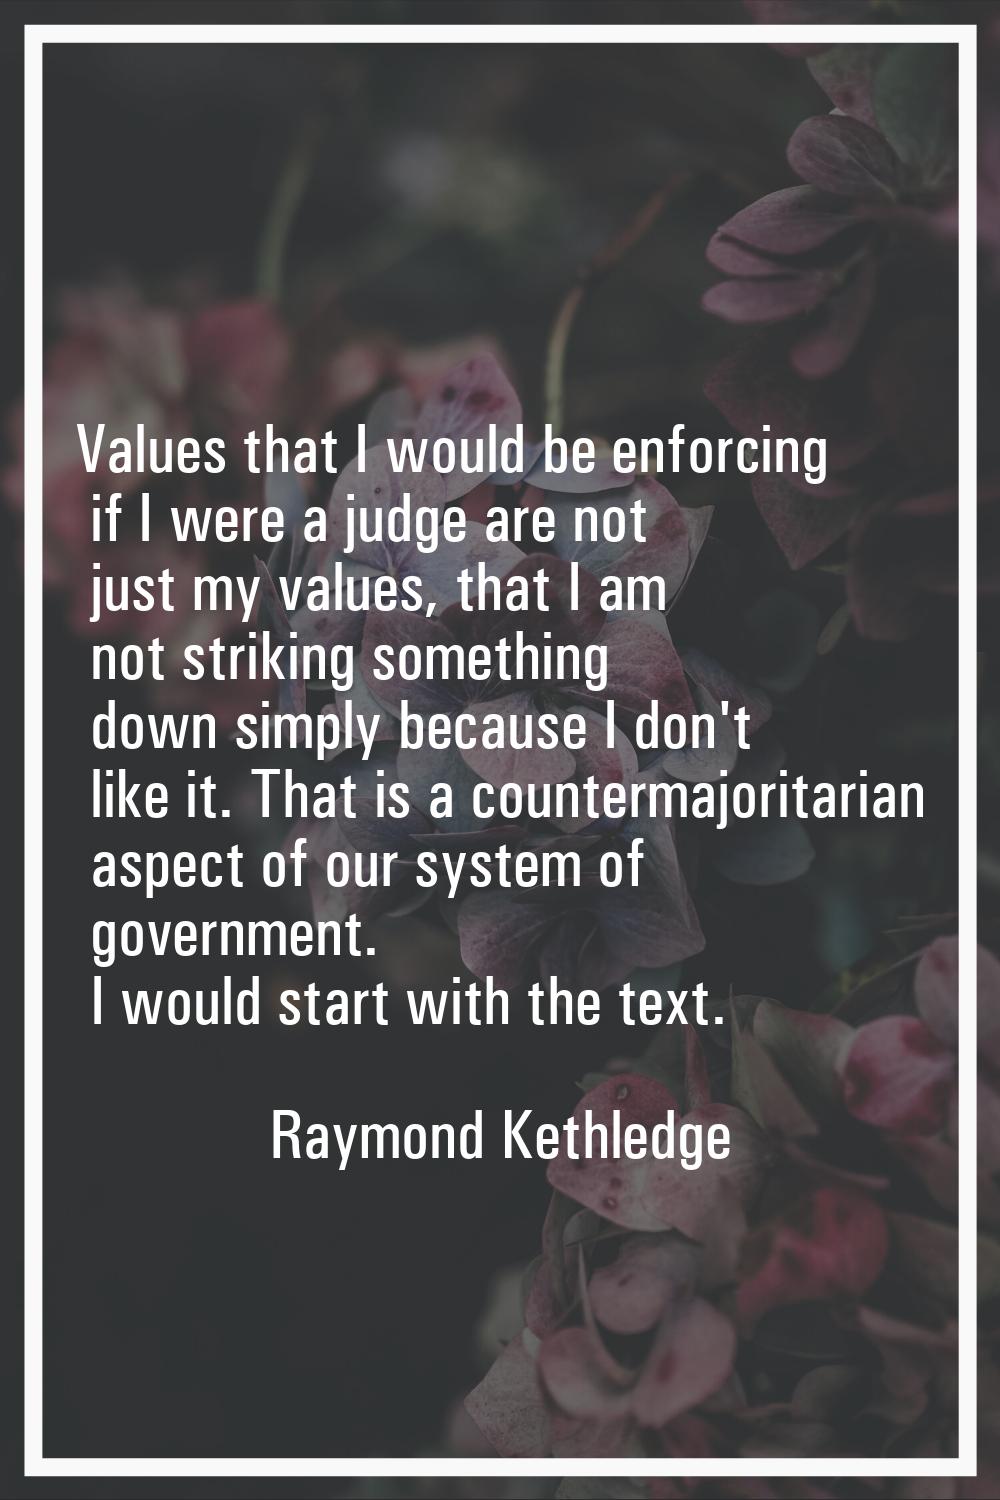 Values that I would be enforcing if I were a judge are not just my values, that I am not striking s